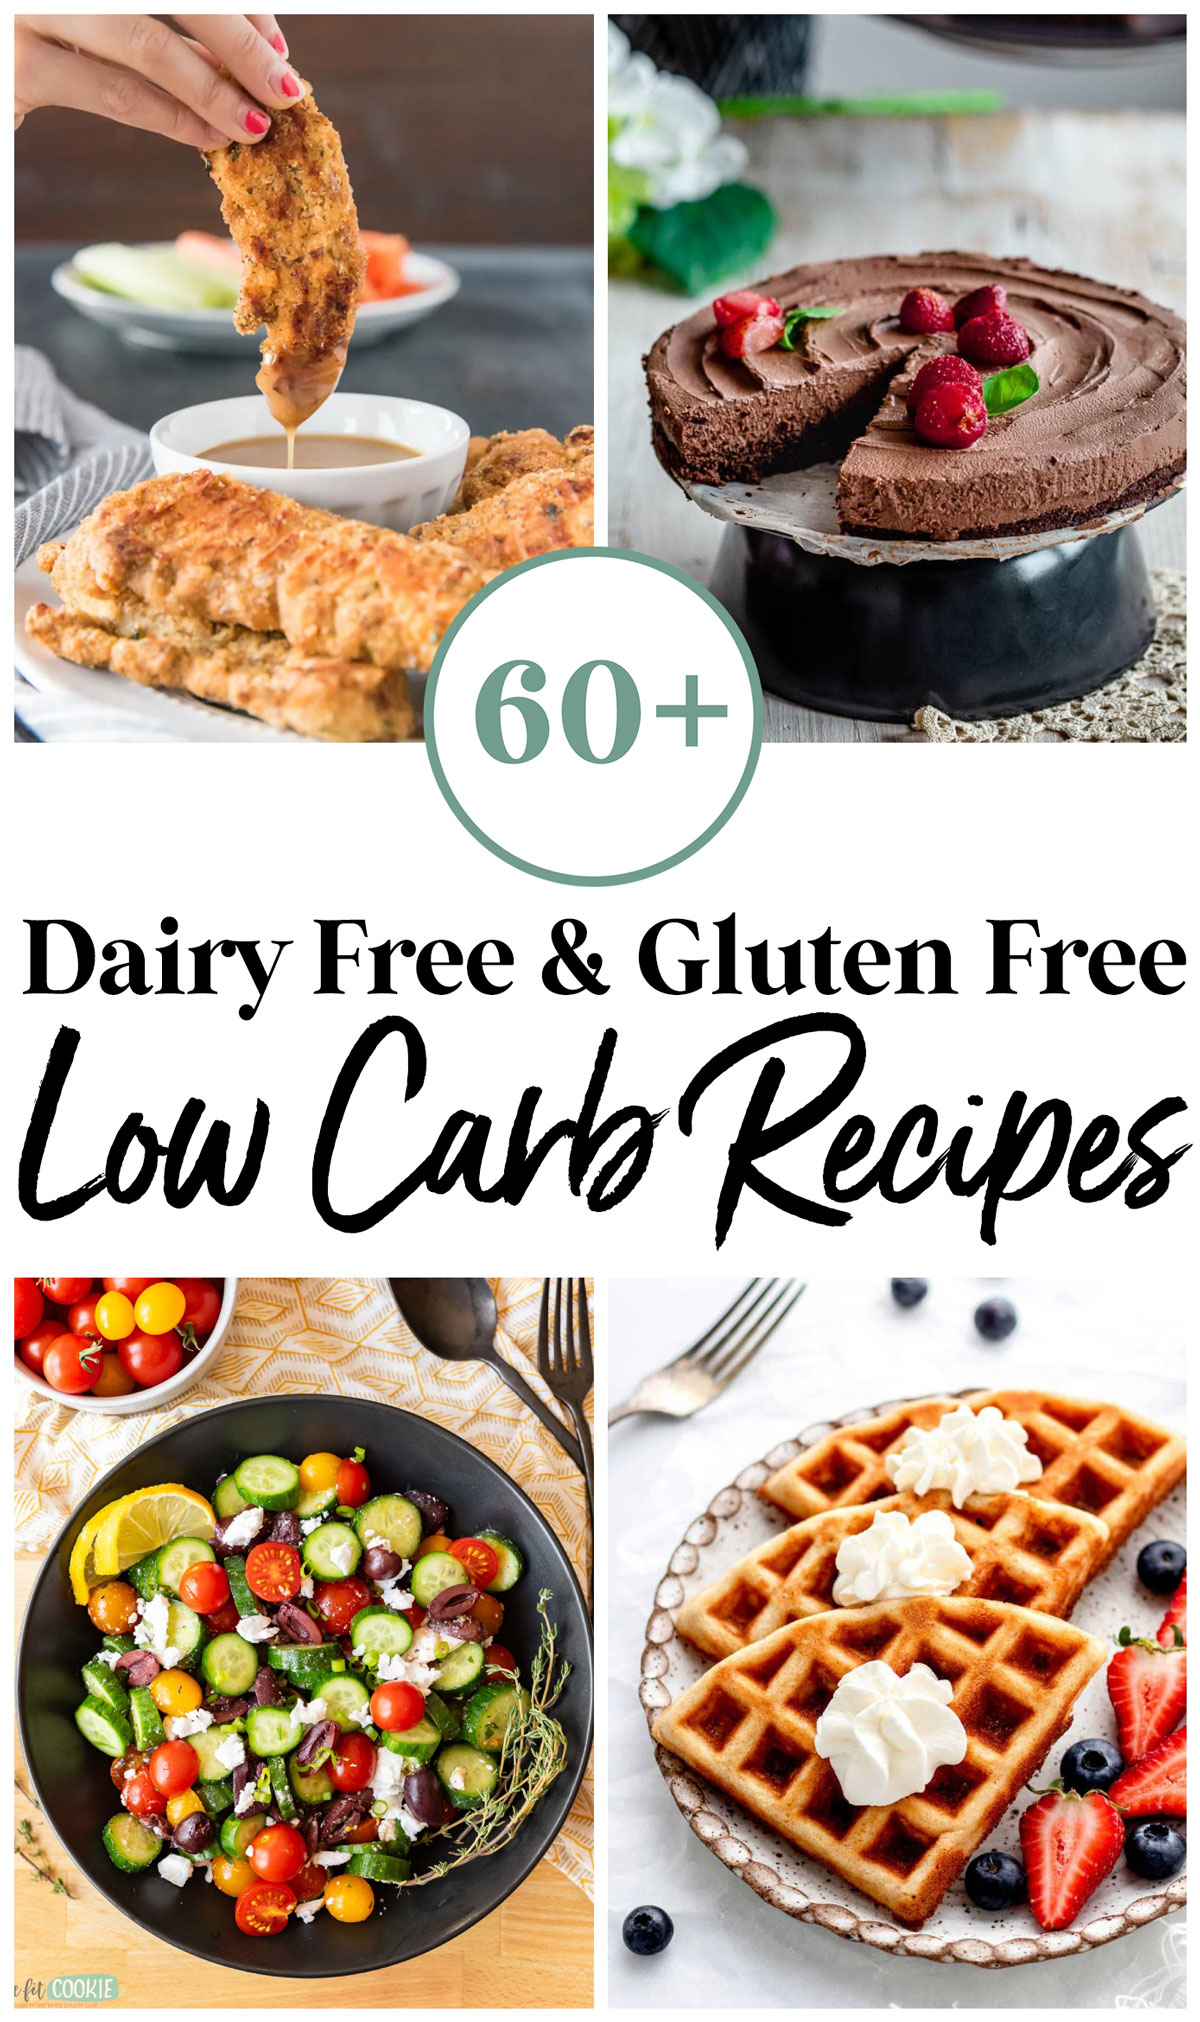 60 dairy & gluten free low carb recipes. This collection of recipes is perfect for individuals following a dairy-free and low-carb diet. Say goodbye to dairy products while still enjoying delicious meals that are both